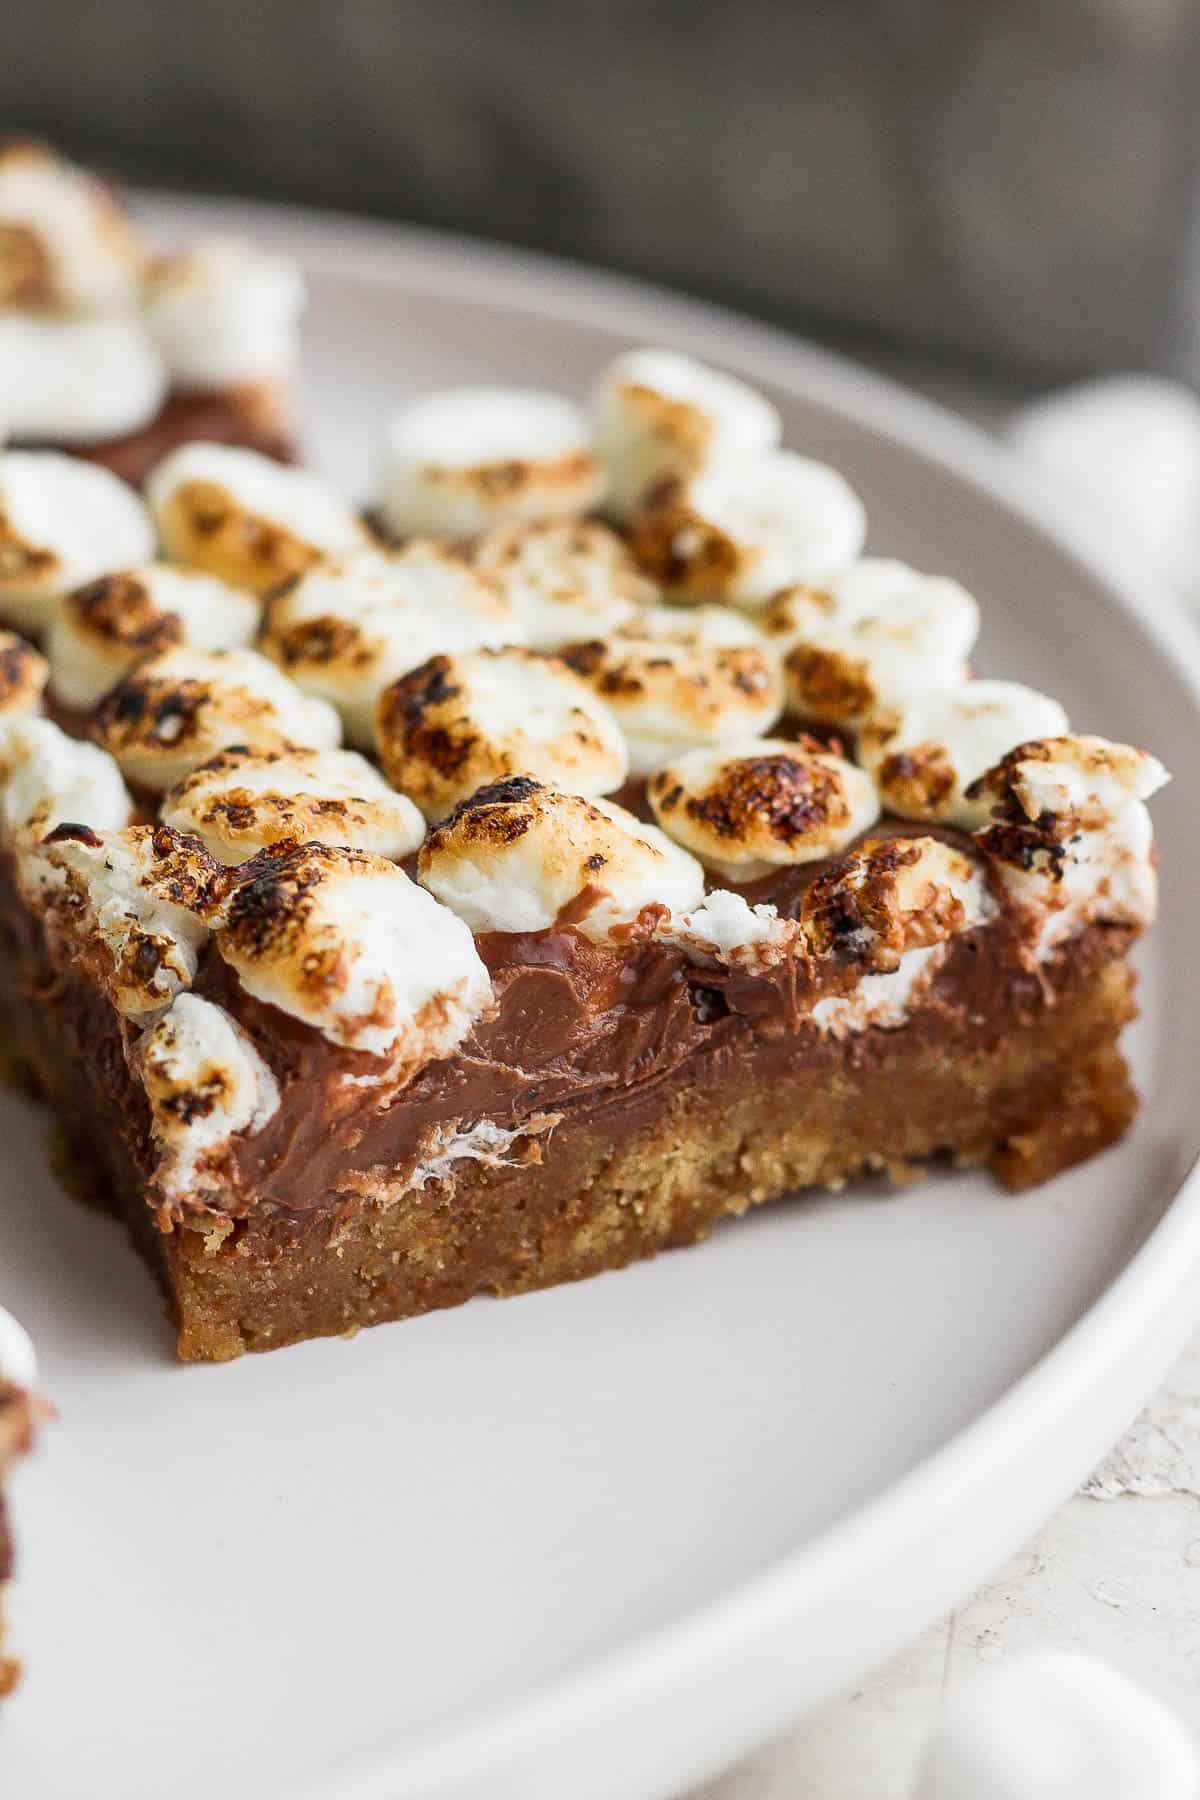 A s'mores bar on a plate.